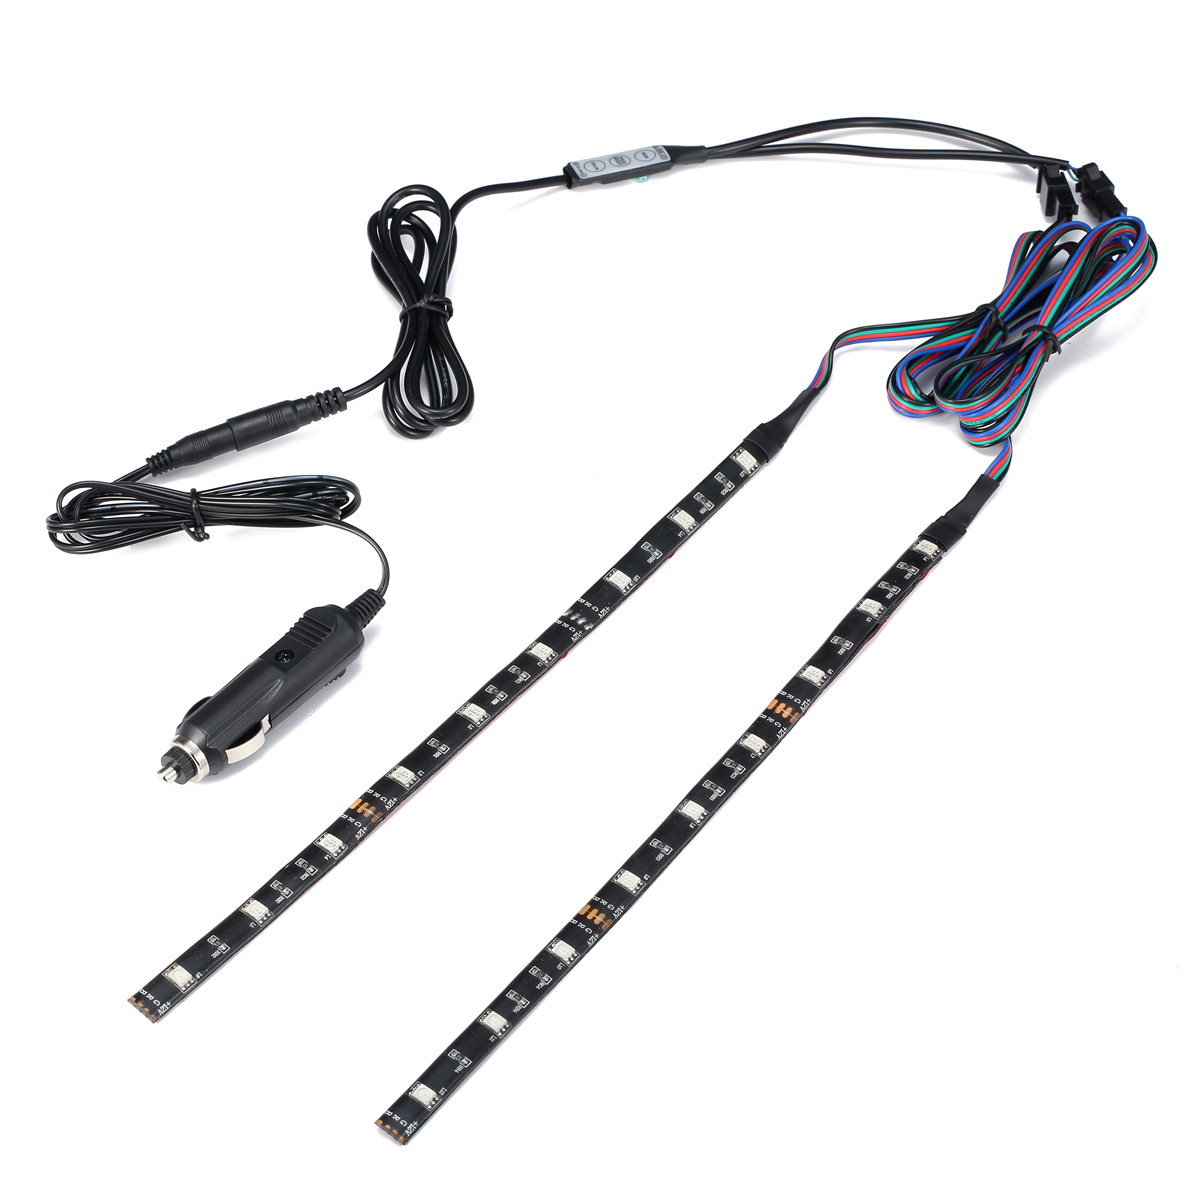 2PCS-30CM-5050-SMD-Waterproof-RGB-LED-Strip-Light-with-DC-Mini-ControllerCar-Charger-DC12V-1209605-1